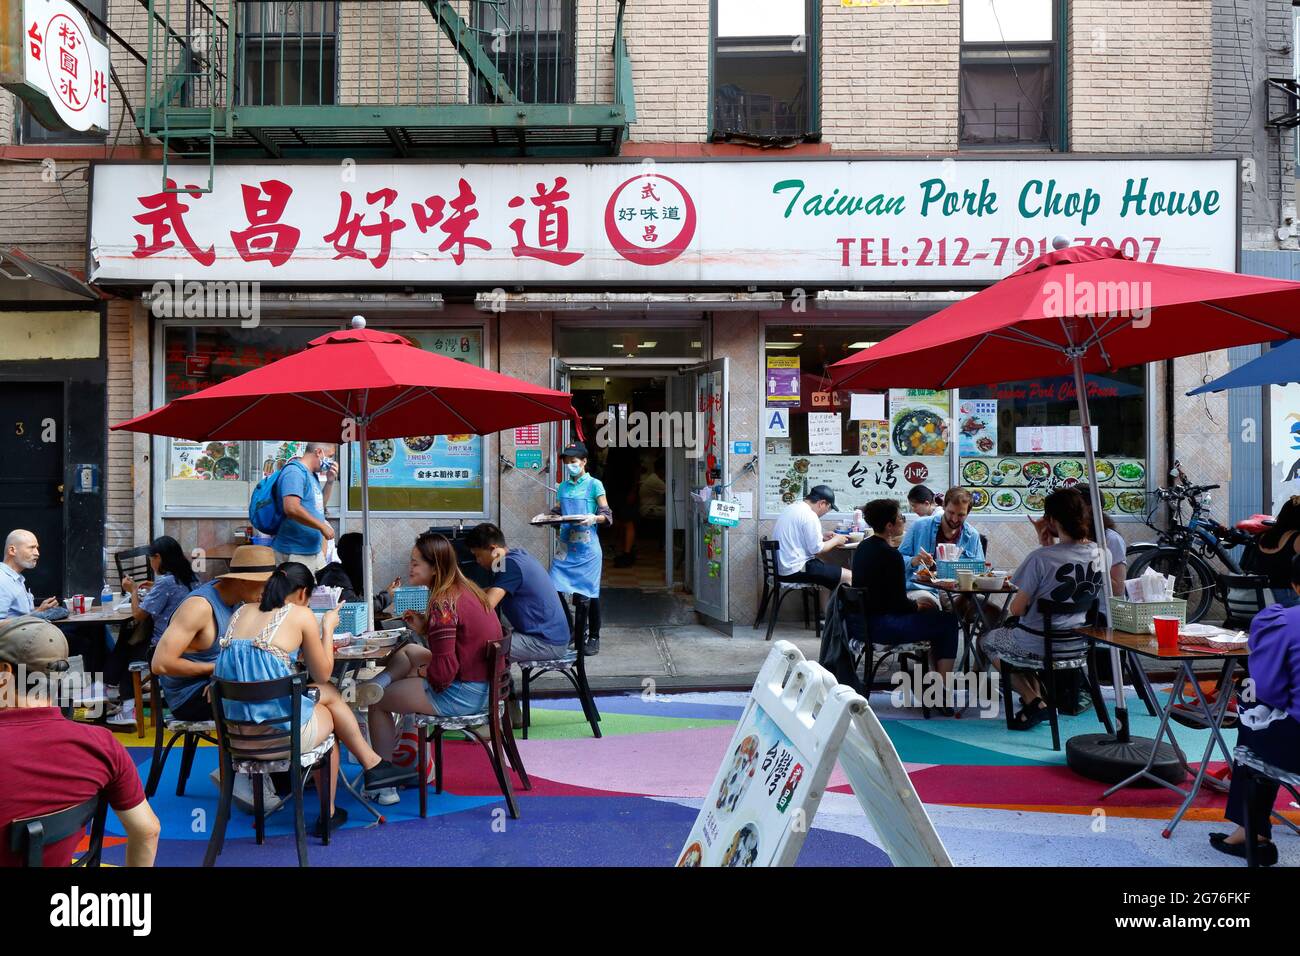 Taiwan Pork Chop House, 3 Doyers St, New York, NYC storefront photo of a Chinese restaurant in Manhattan Chinatown. 華埠, 紐約, 唐人街 Stock Photo